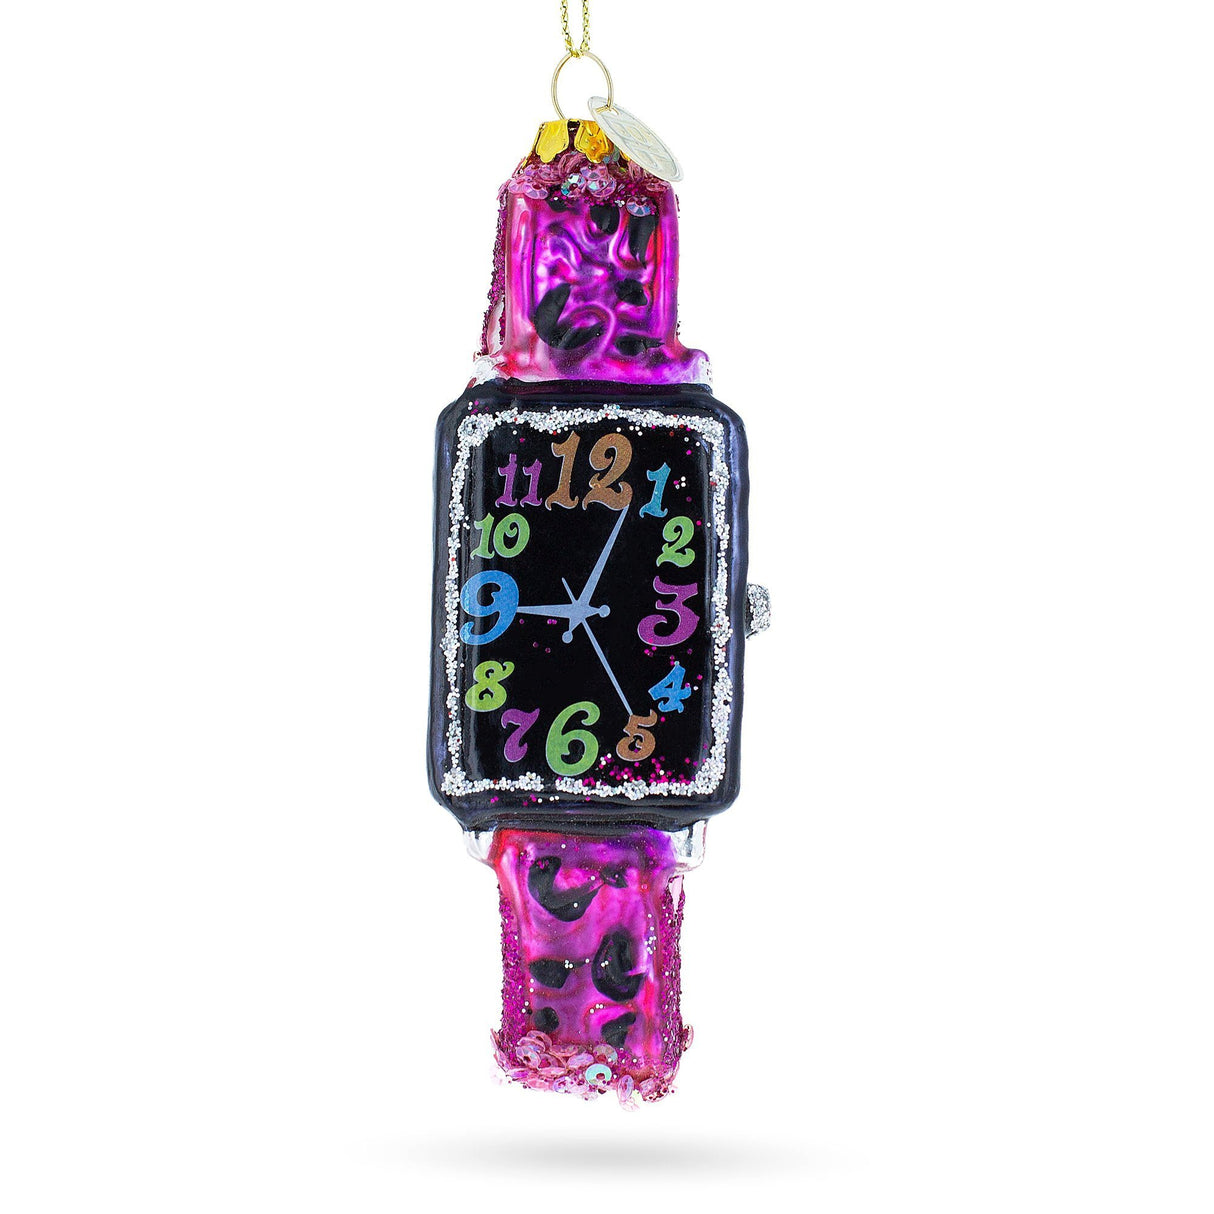 Glass Trendy Fashion Watch - Blown Glass Christmas Ornament in Multi color